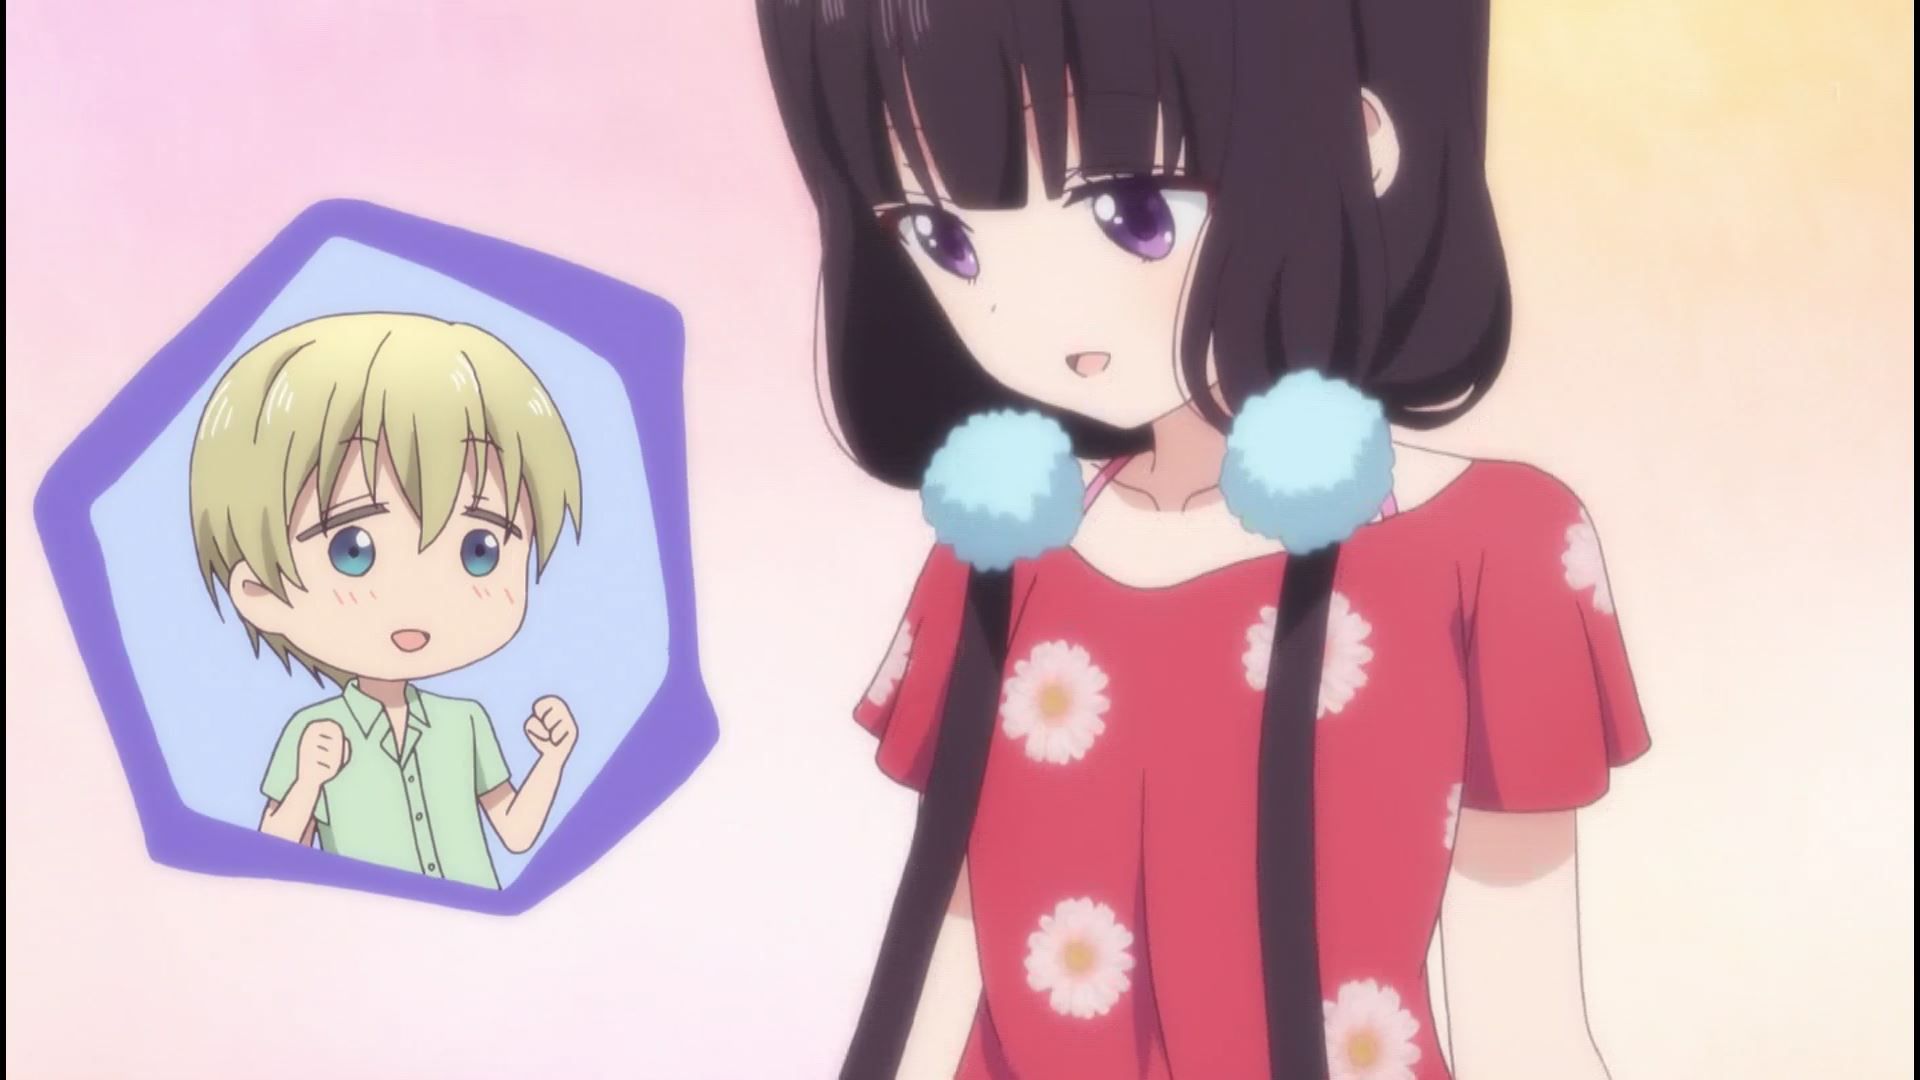 Anime ' blend S ' 6 episodes of girls erotic swimsuit times! such as breasts and buttocks! 5